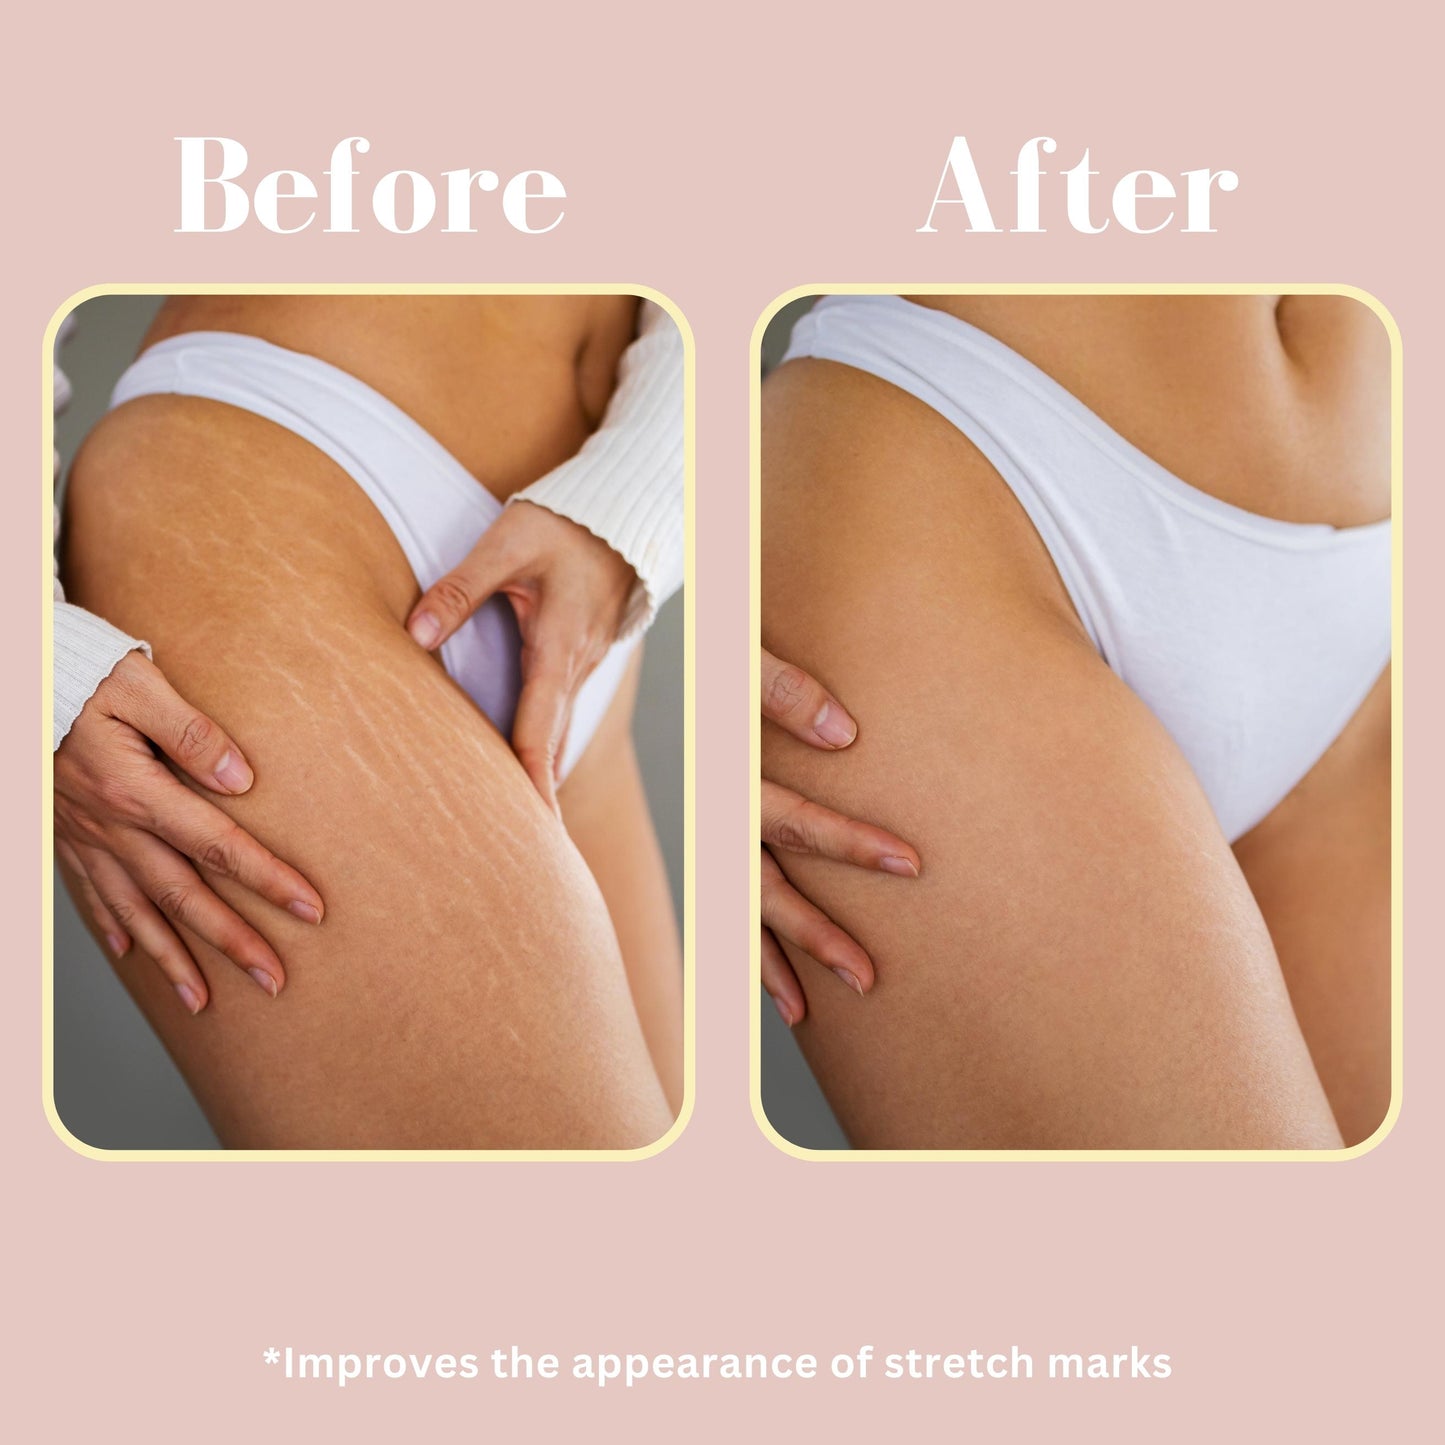 The coffee scrub Exfoliation Bundle before and after stretch marks